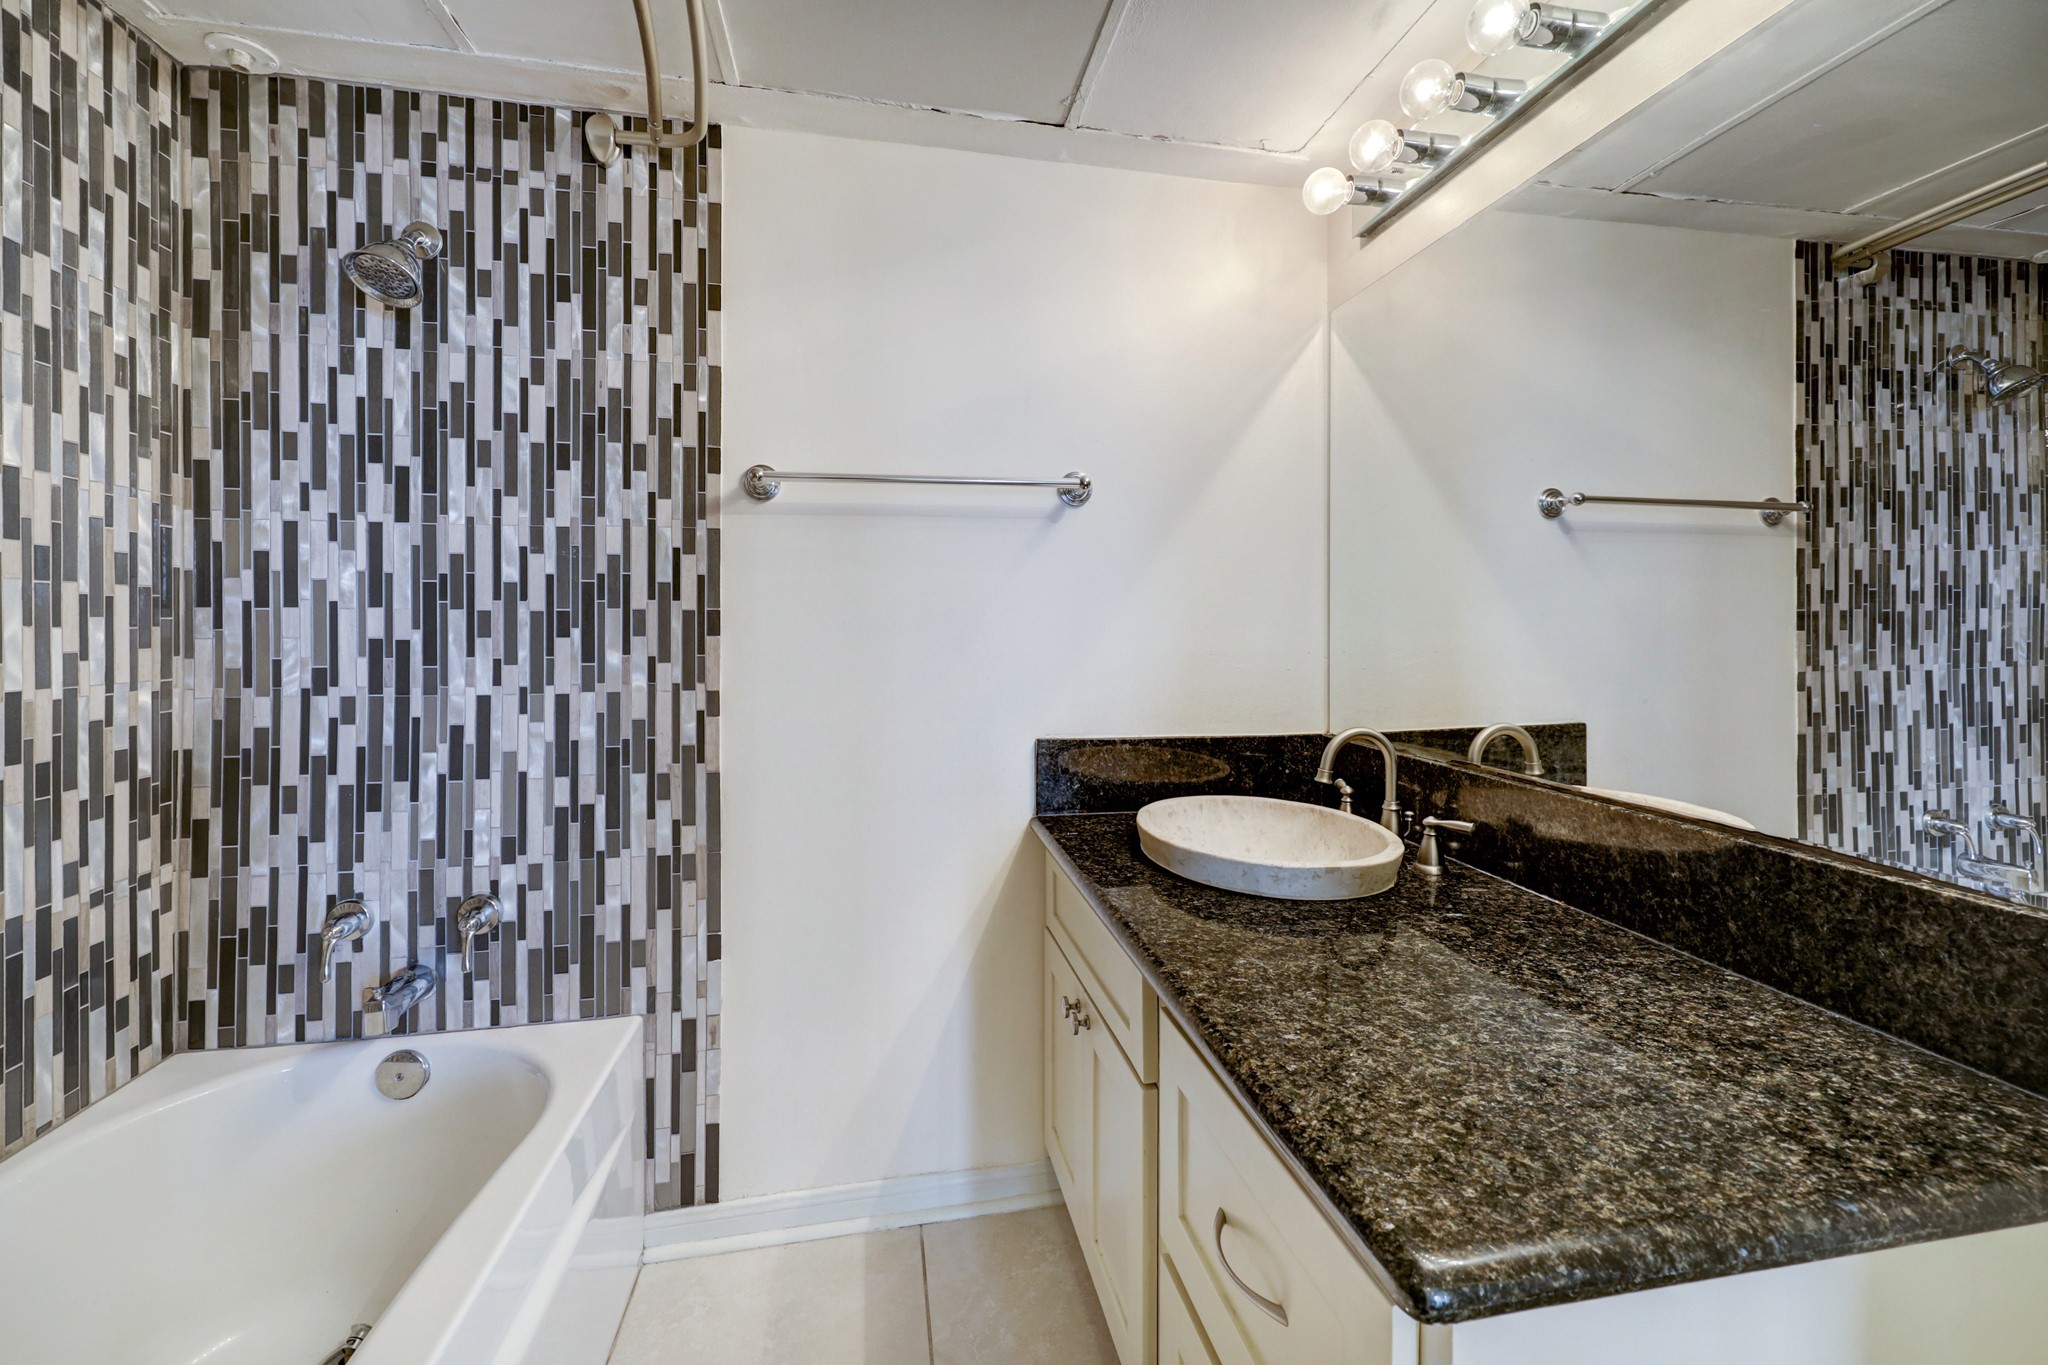 The secondary bath features a tub/shower, nice lighting, and a granite countertop sink area.